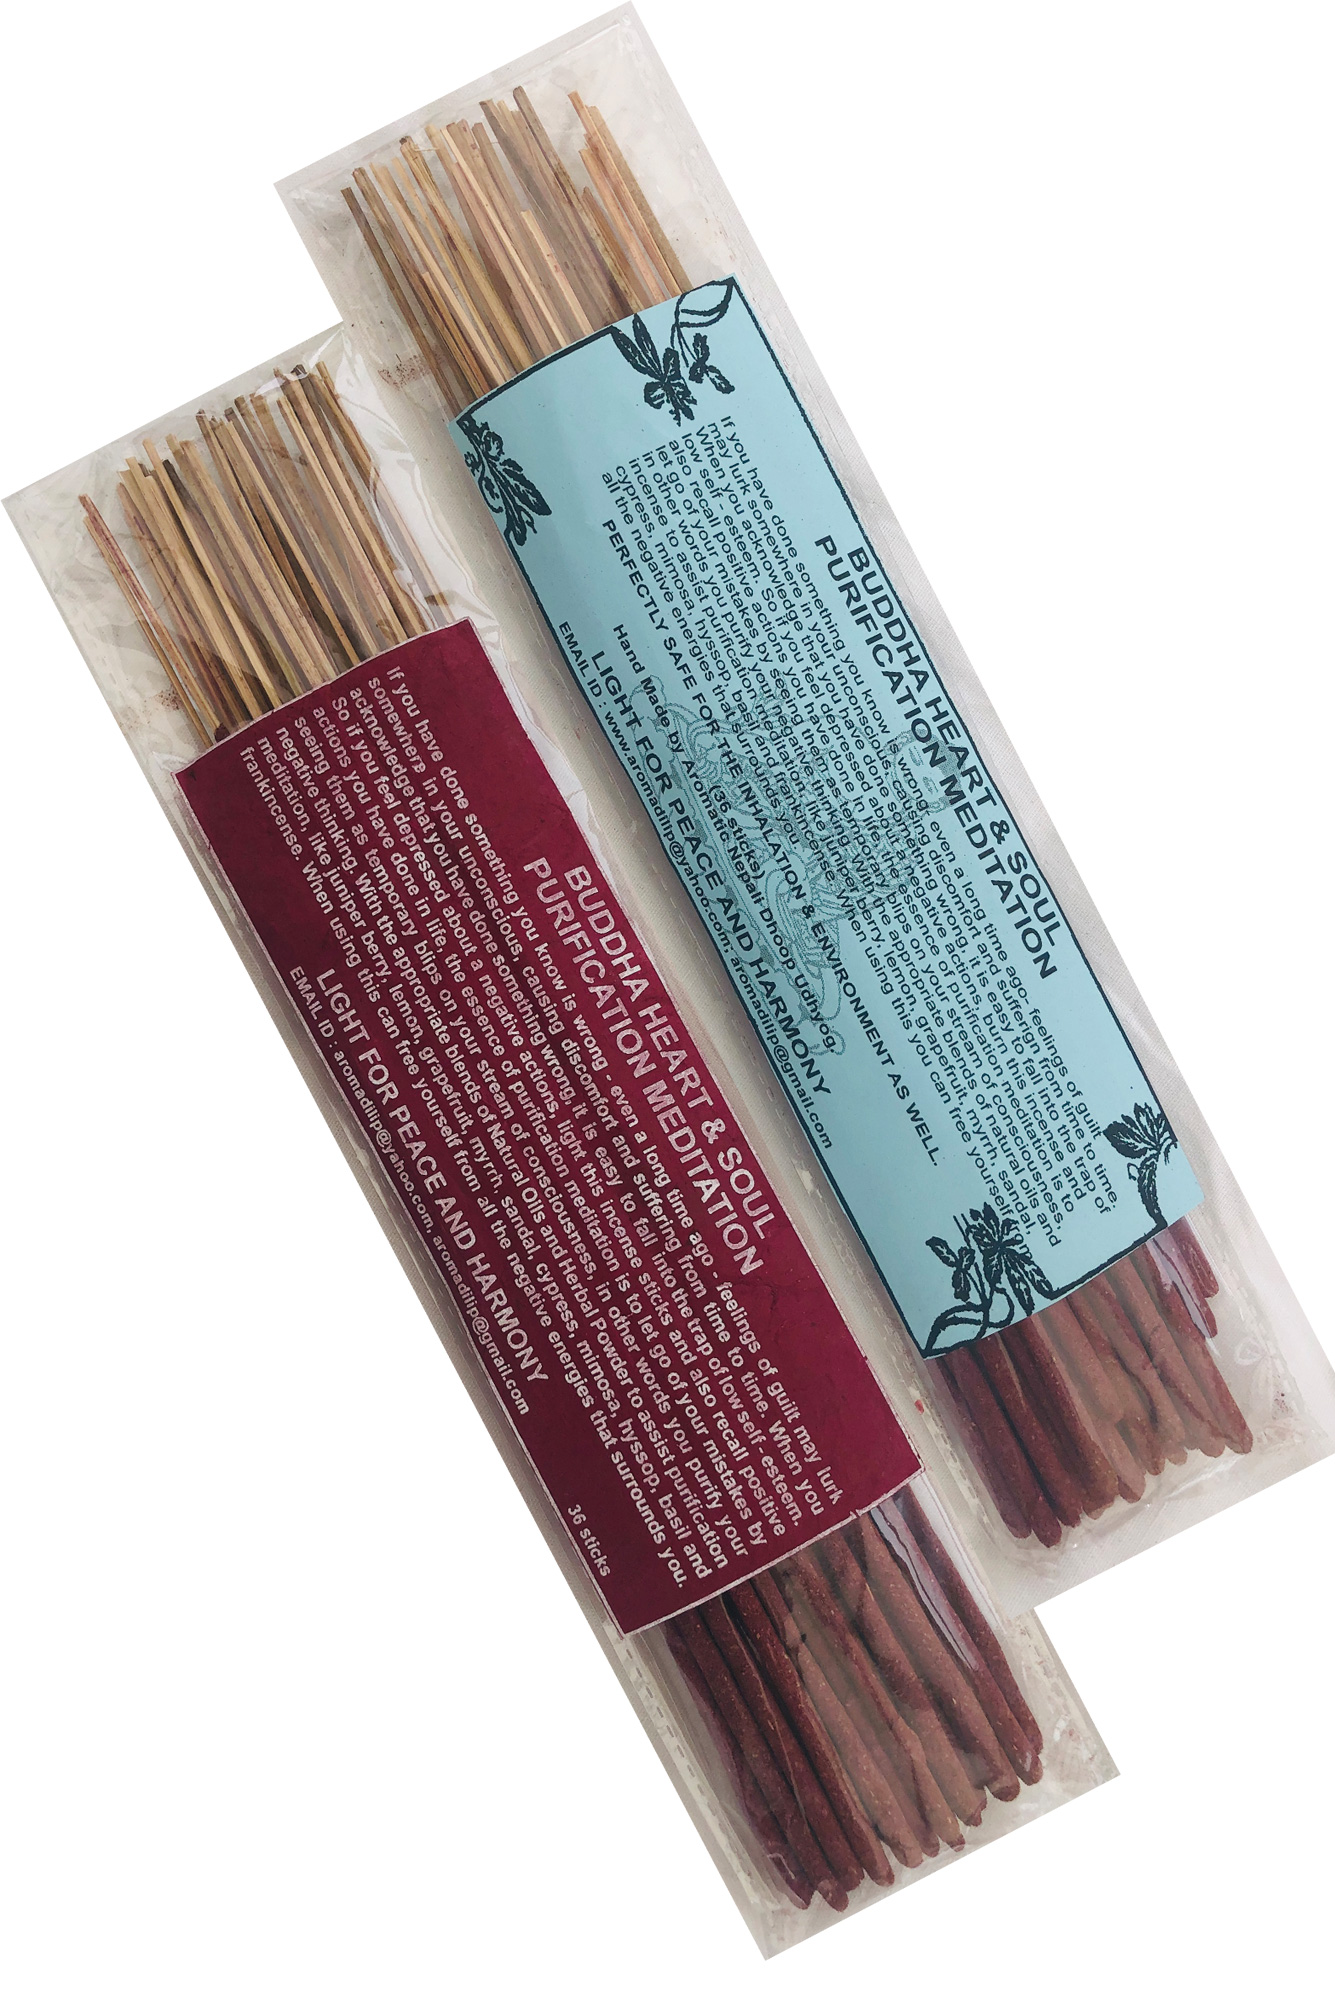 Buddha heart and soul incense - maxi pack